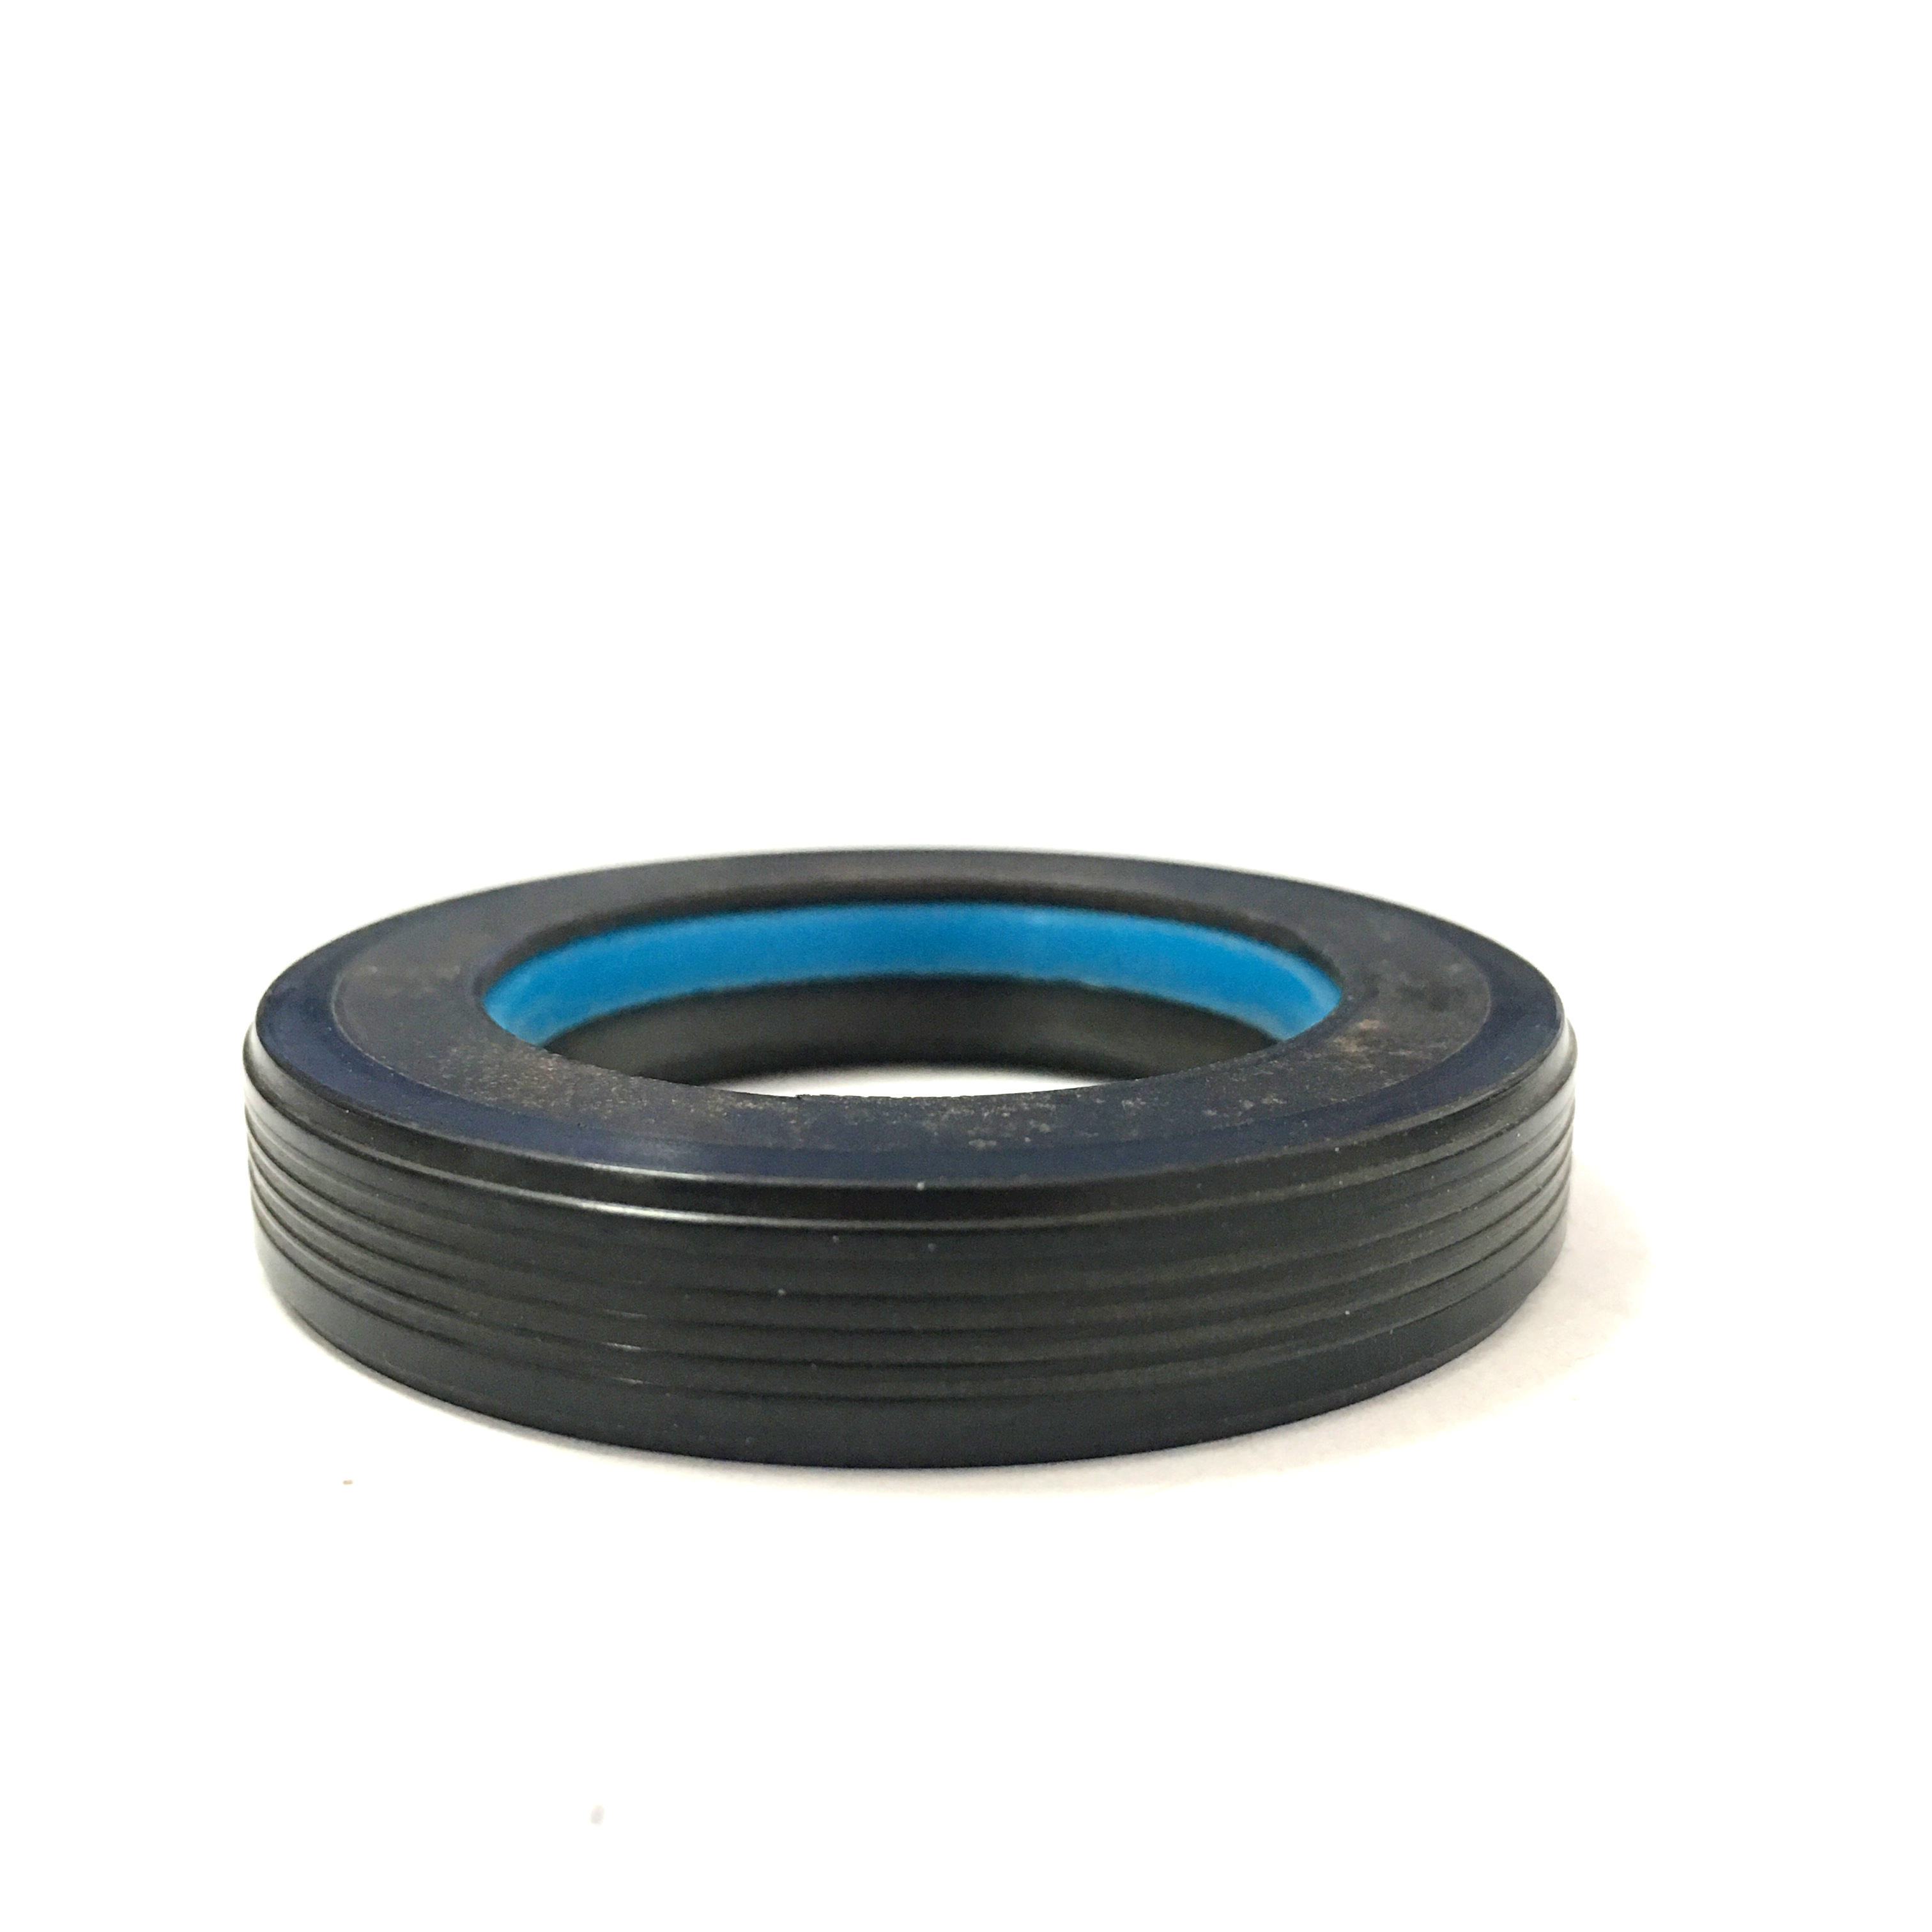 Auto Oil Seal Fit For Japanese Car 30*48*8.5